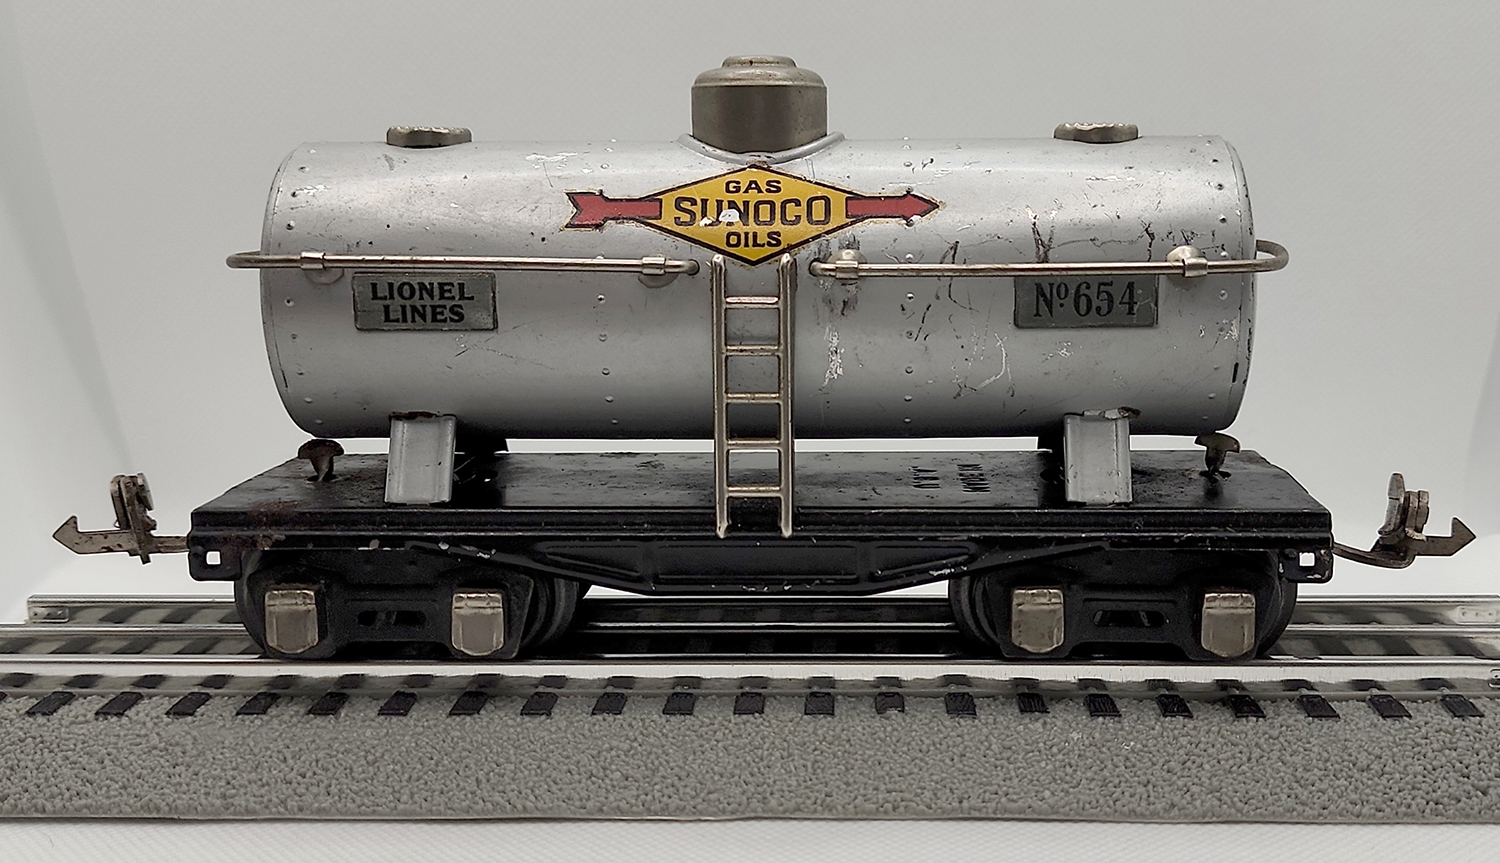 5th view of the Lionel Sunoco Single-Dome #654 Tankcar in my O-scale Collection